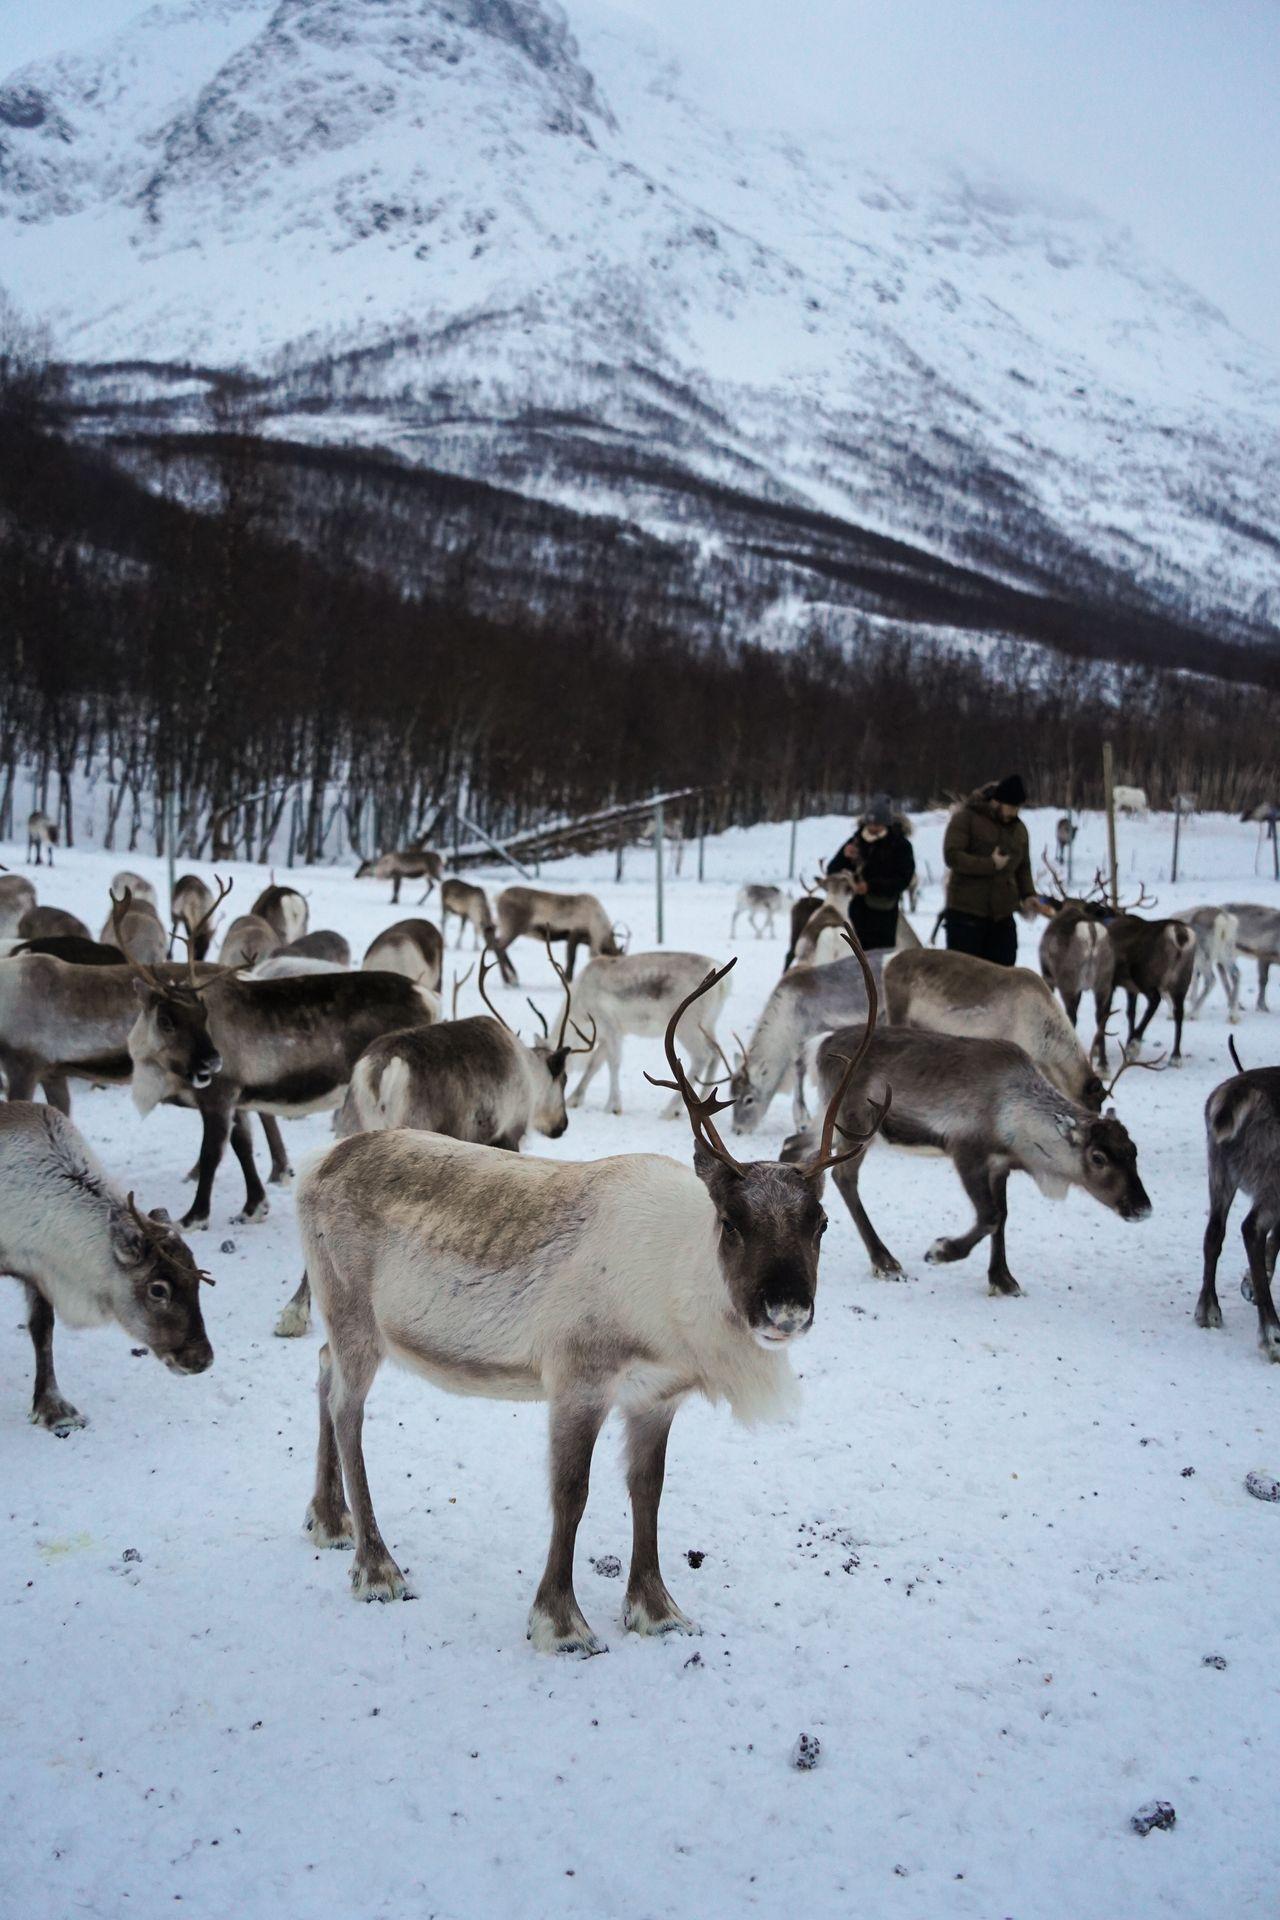 A herd of reindeer with a mountain in the background